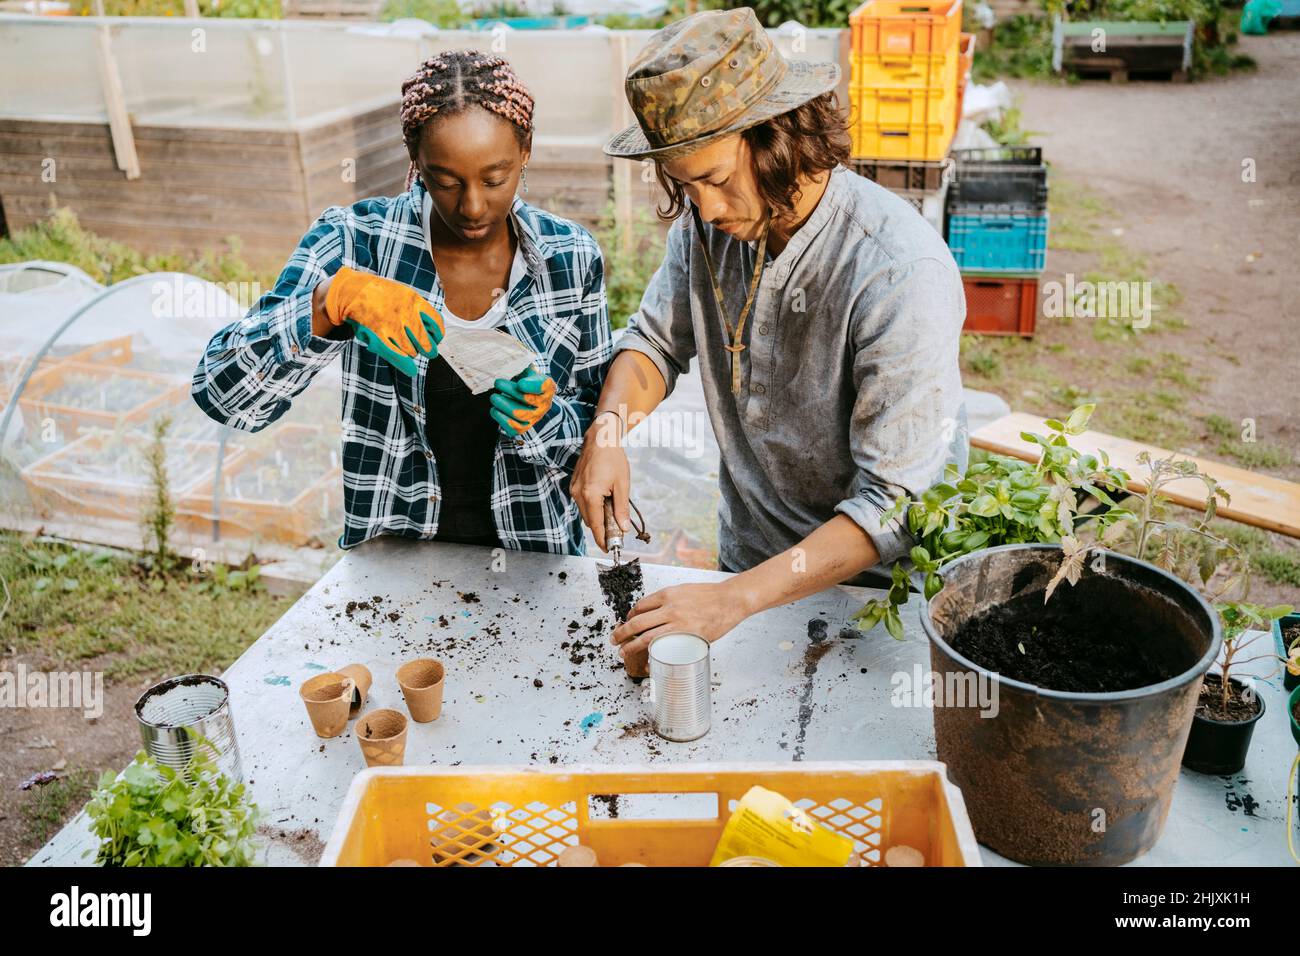 Male and female farmers planting at table in urban garden Stock Photo